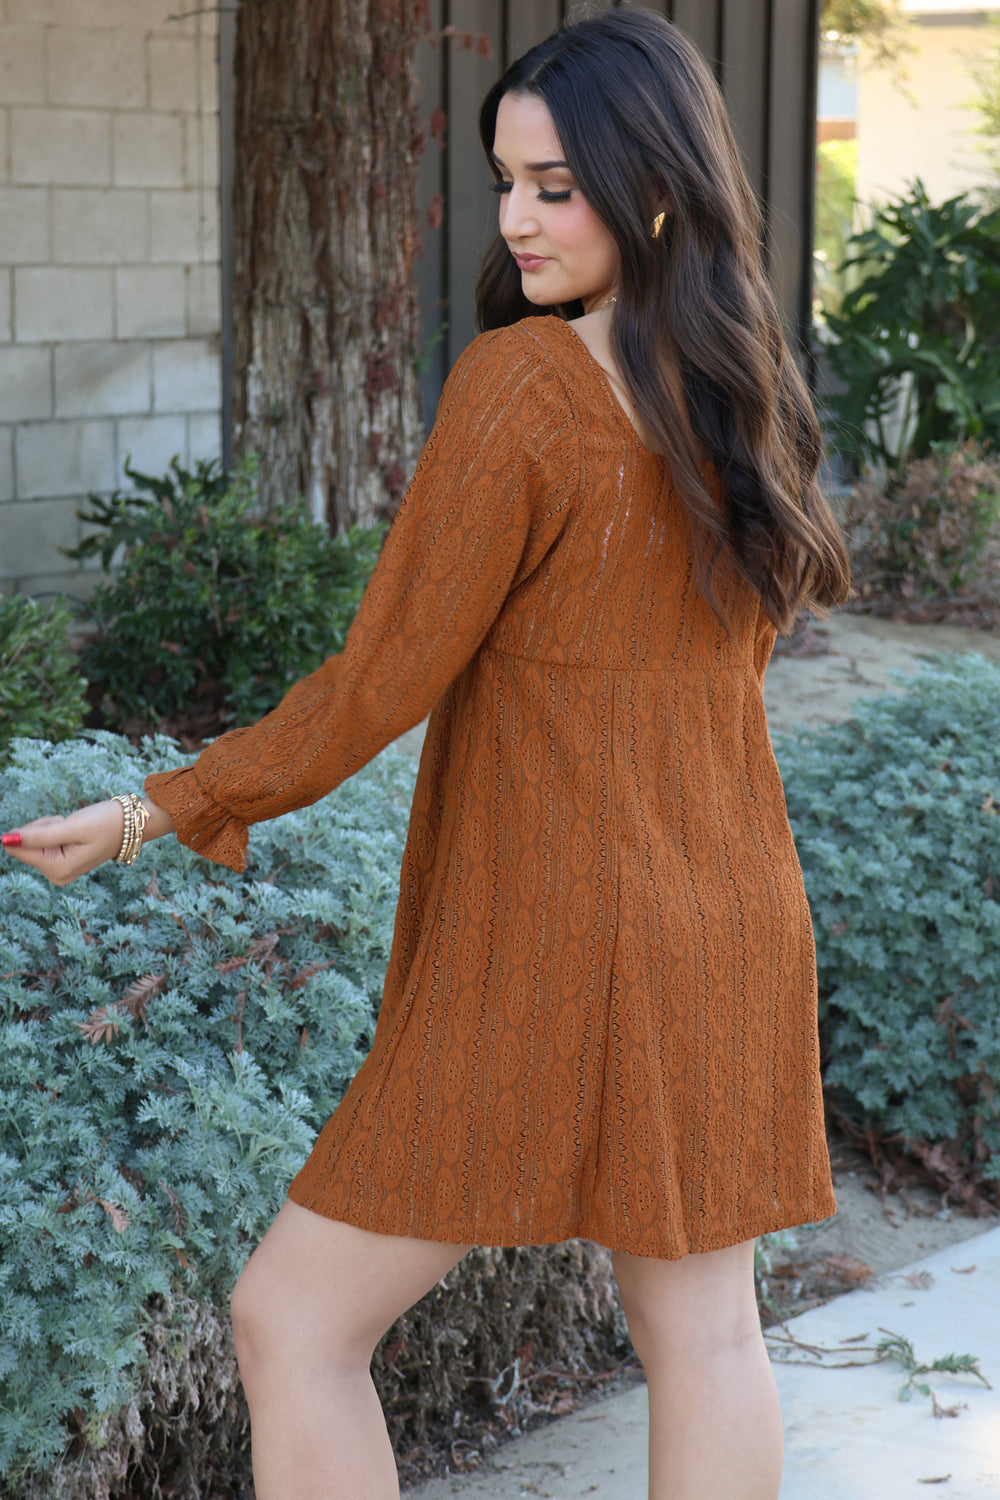 Living In The Moment Dress In Camel - Shop Spoiled Boutique 